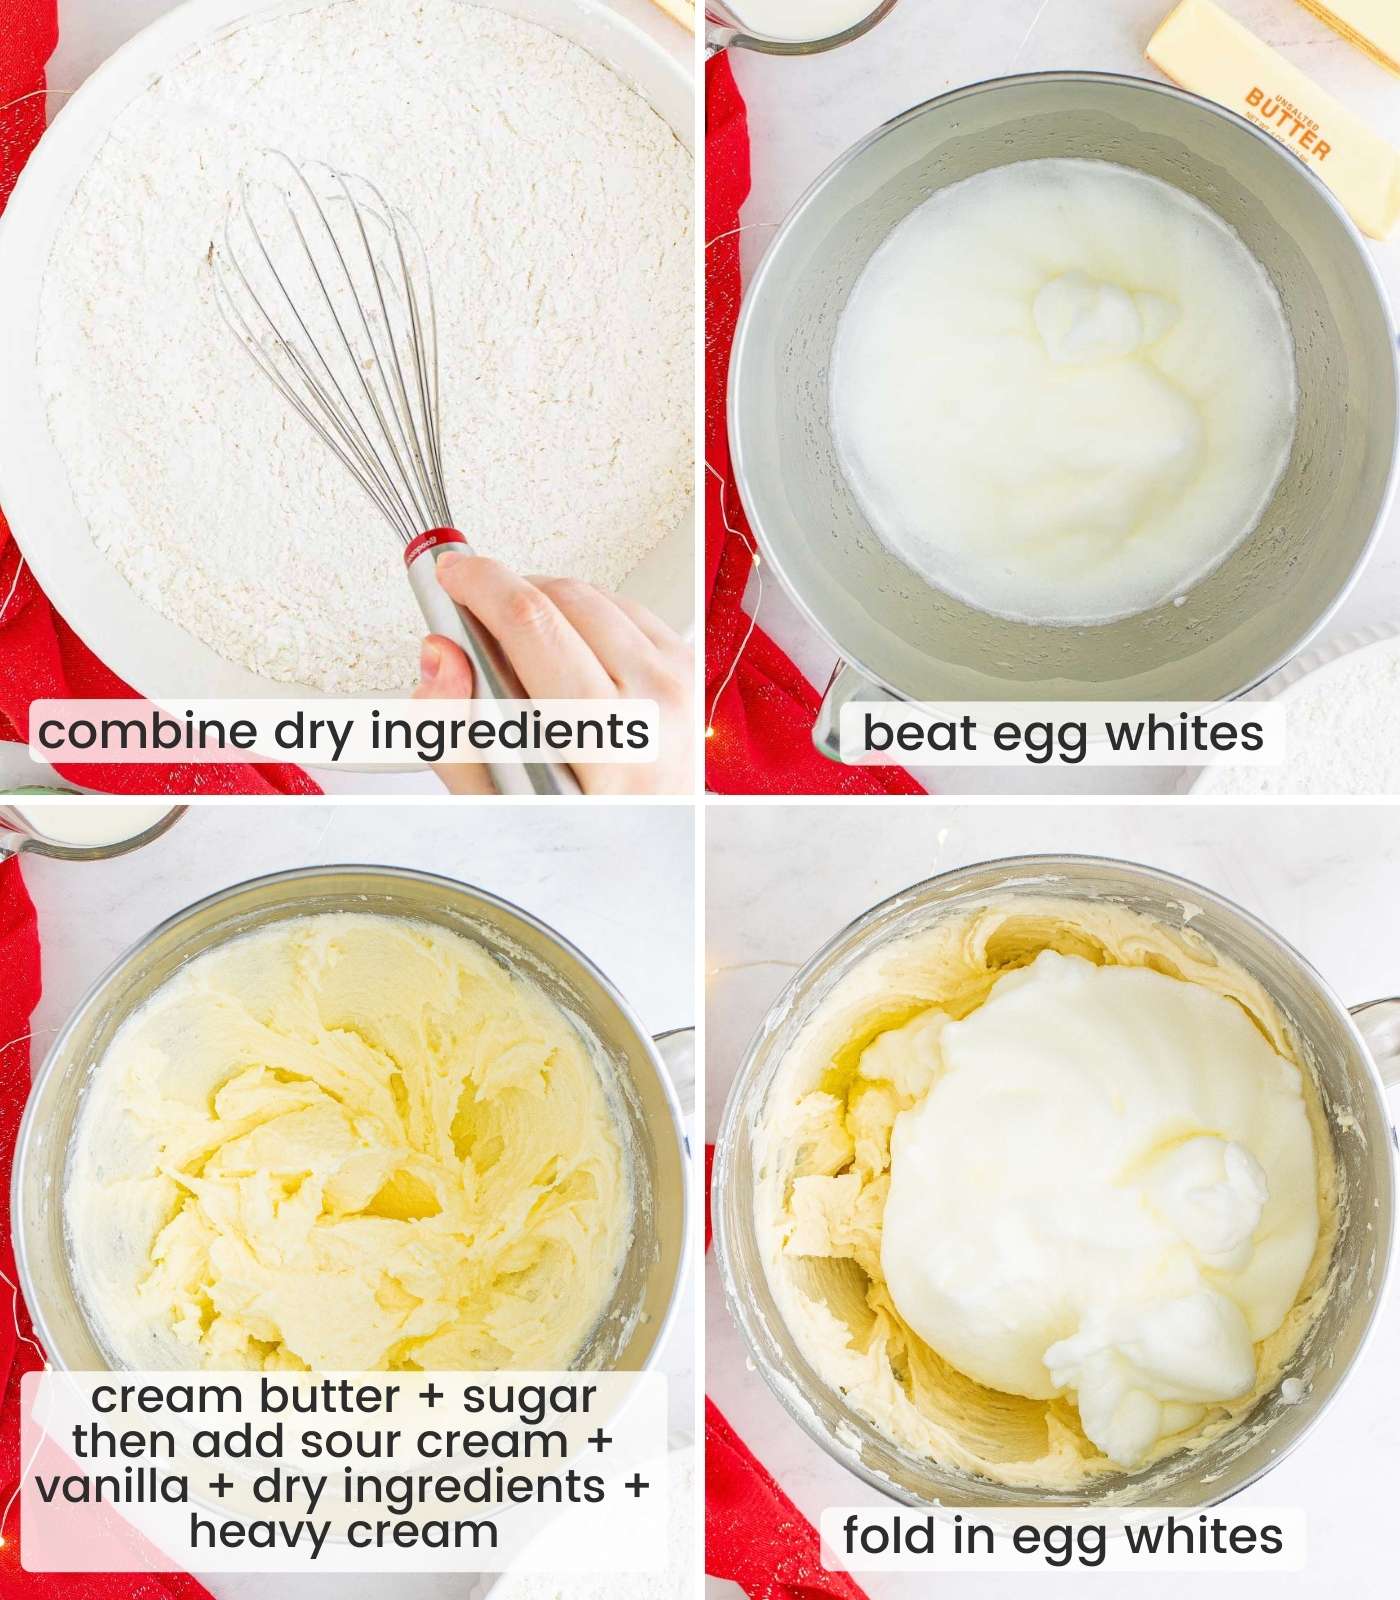 Collage of four images showing how to make the batter of the cake